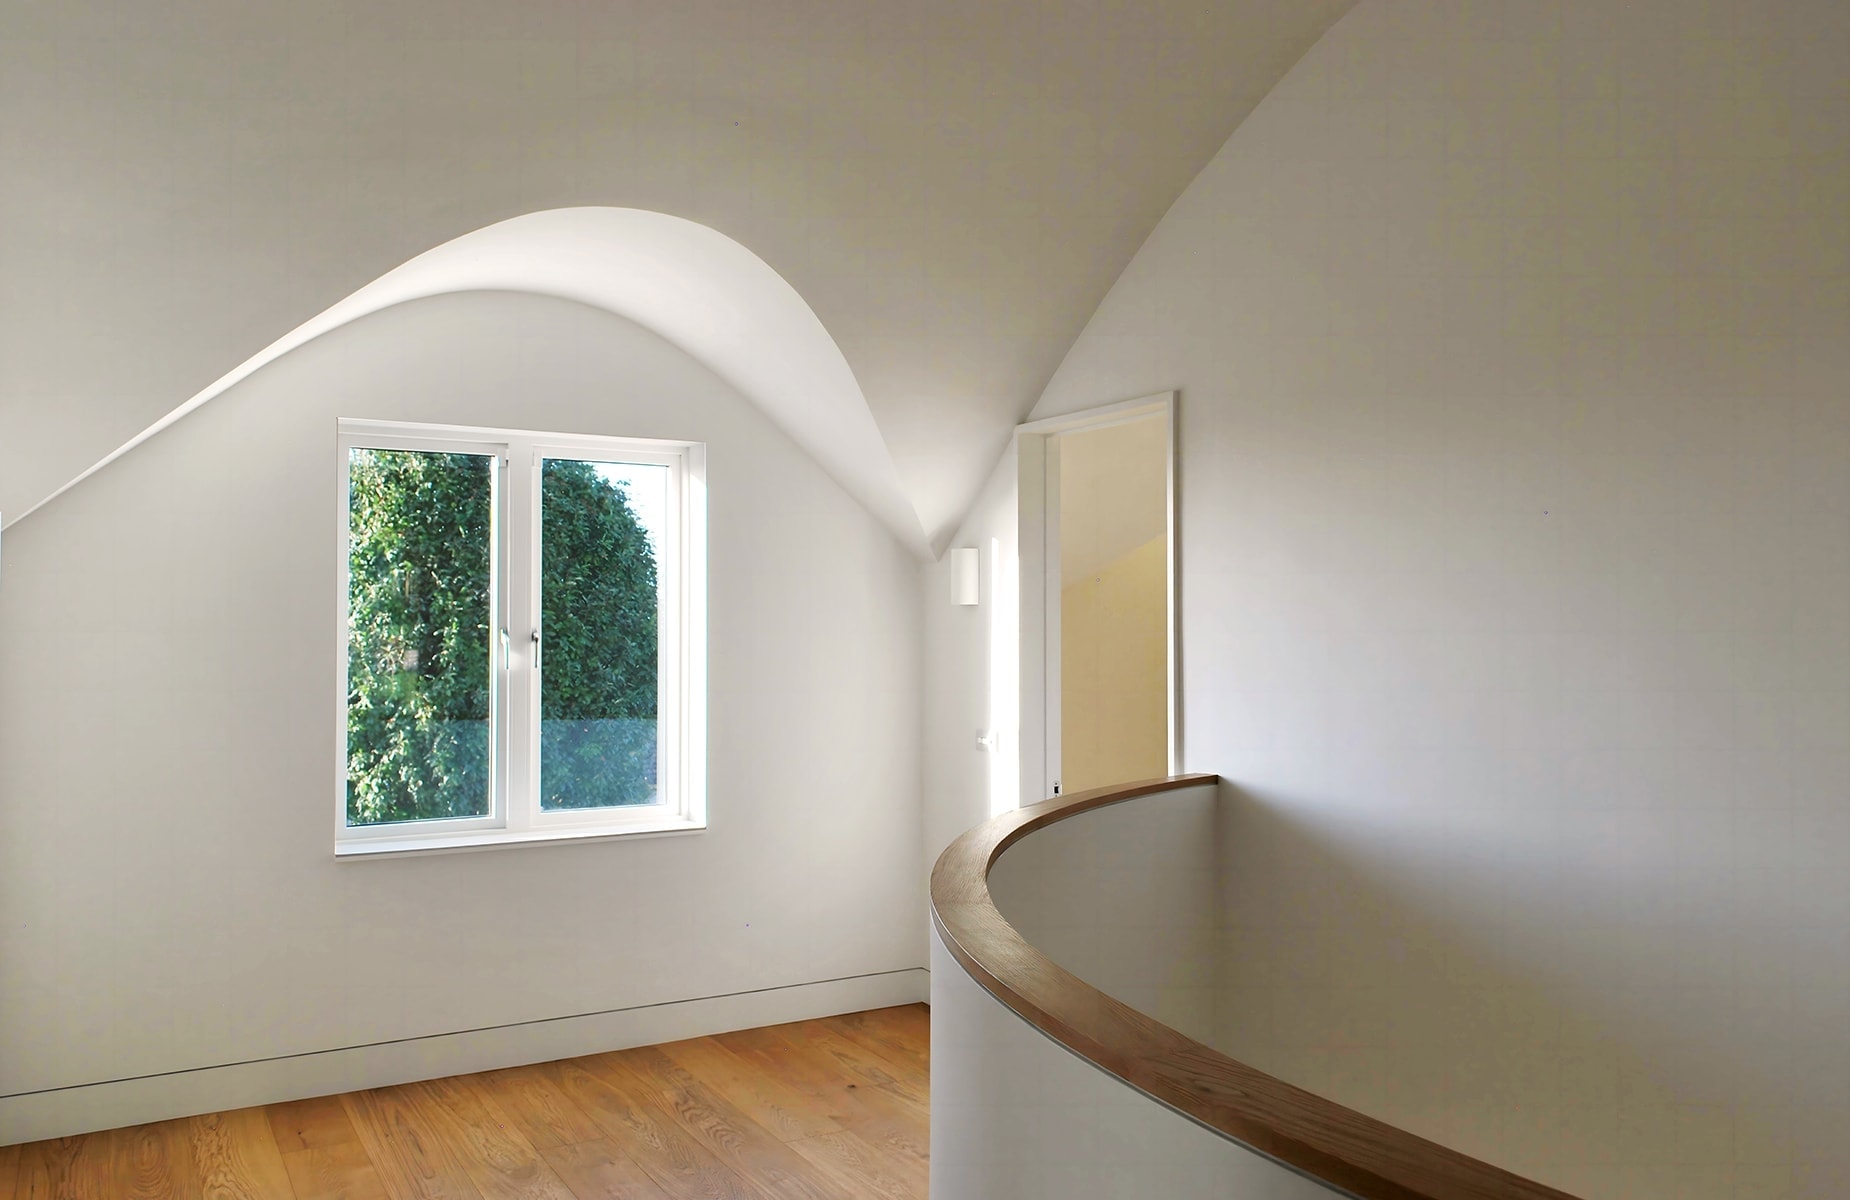 Bright interior with white curves designed by Dublin architects